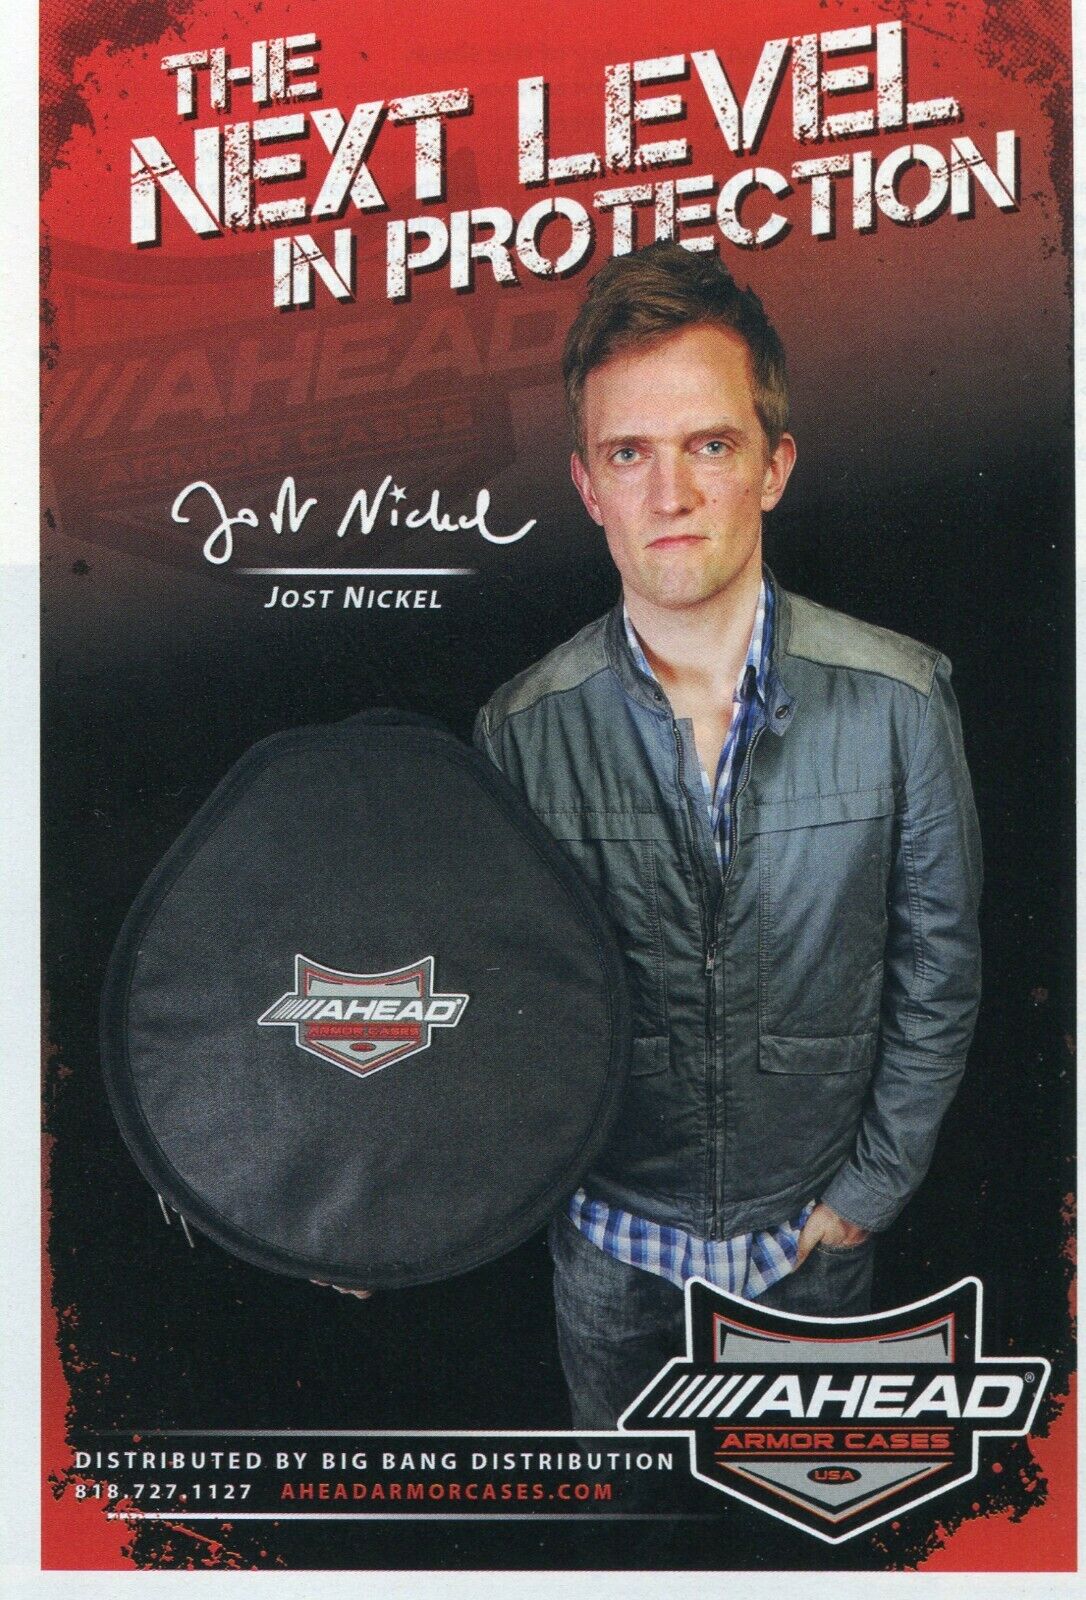 2016 small Print Ad of Ahead Armor Drum Cases w Jost Nickel